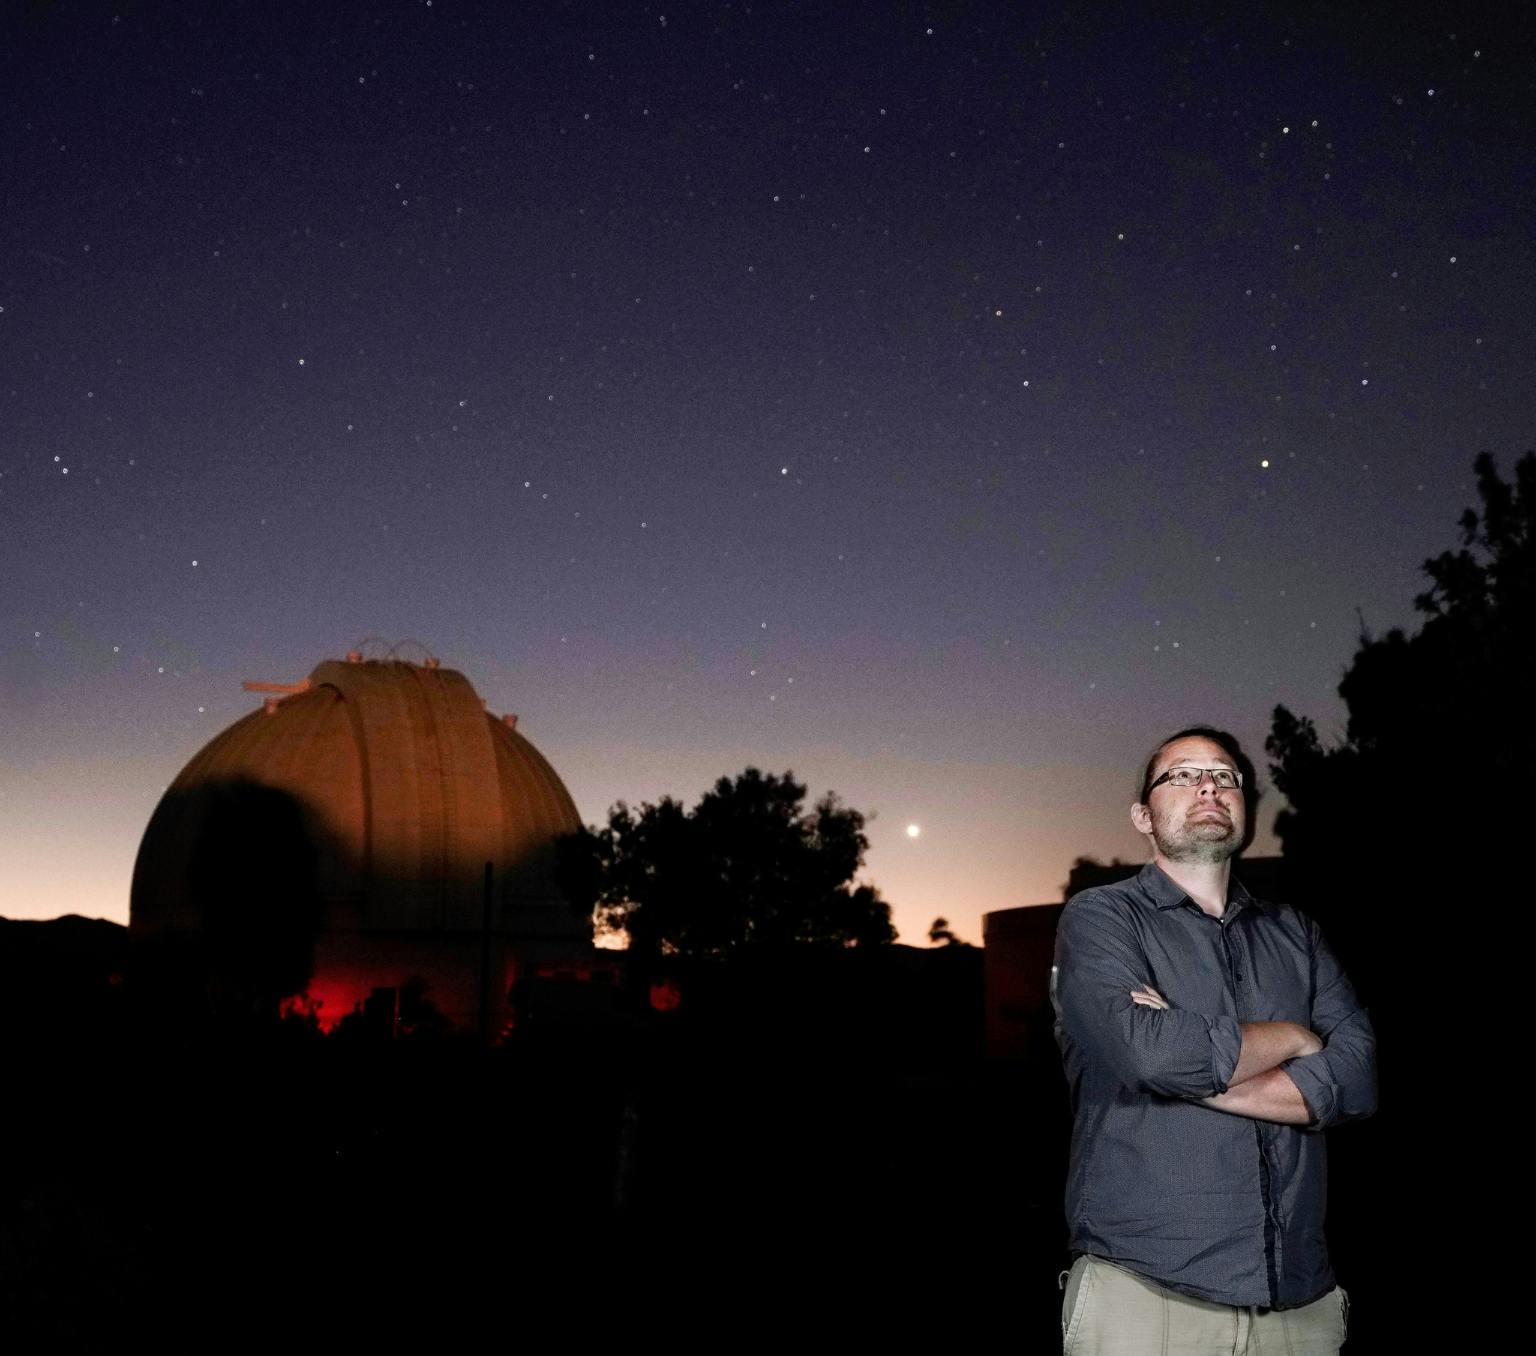 a man is standing withhis arms crossed looking at the night sky. In the background is a large round building and a starry night sky